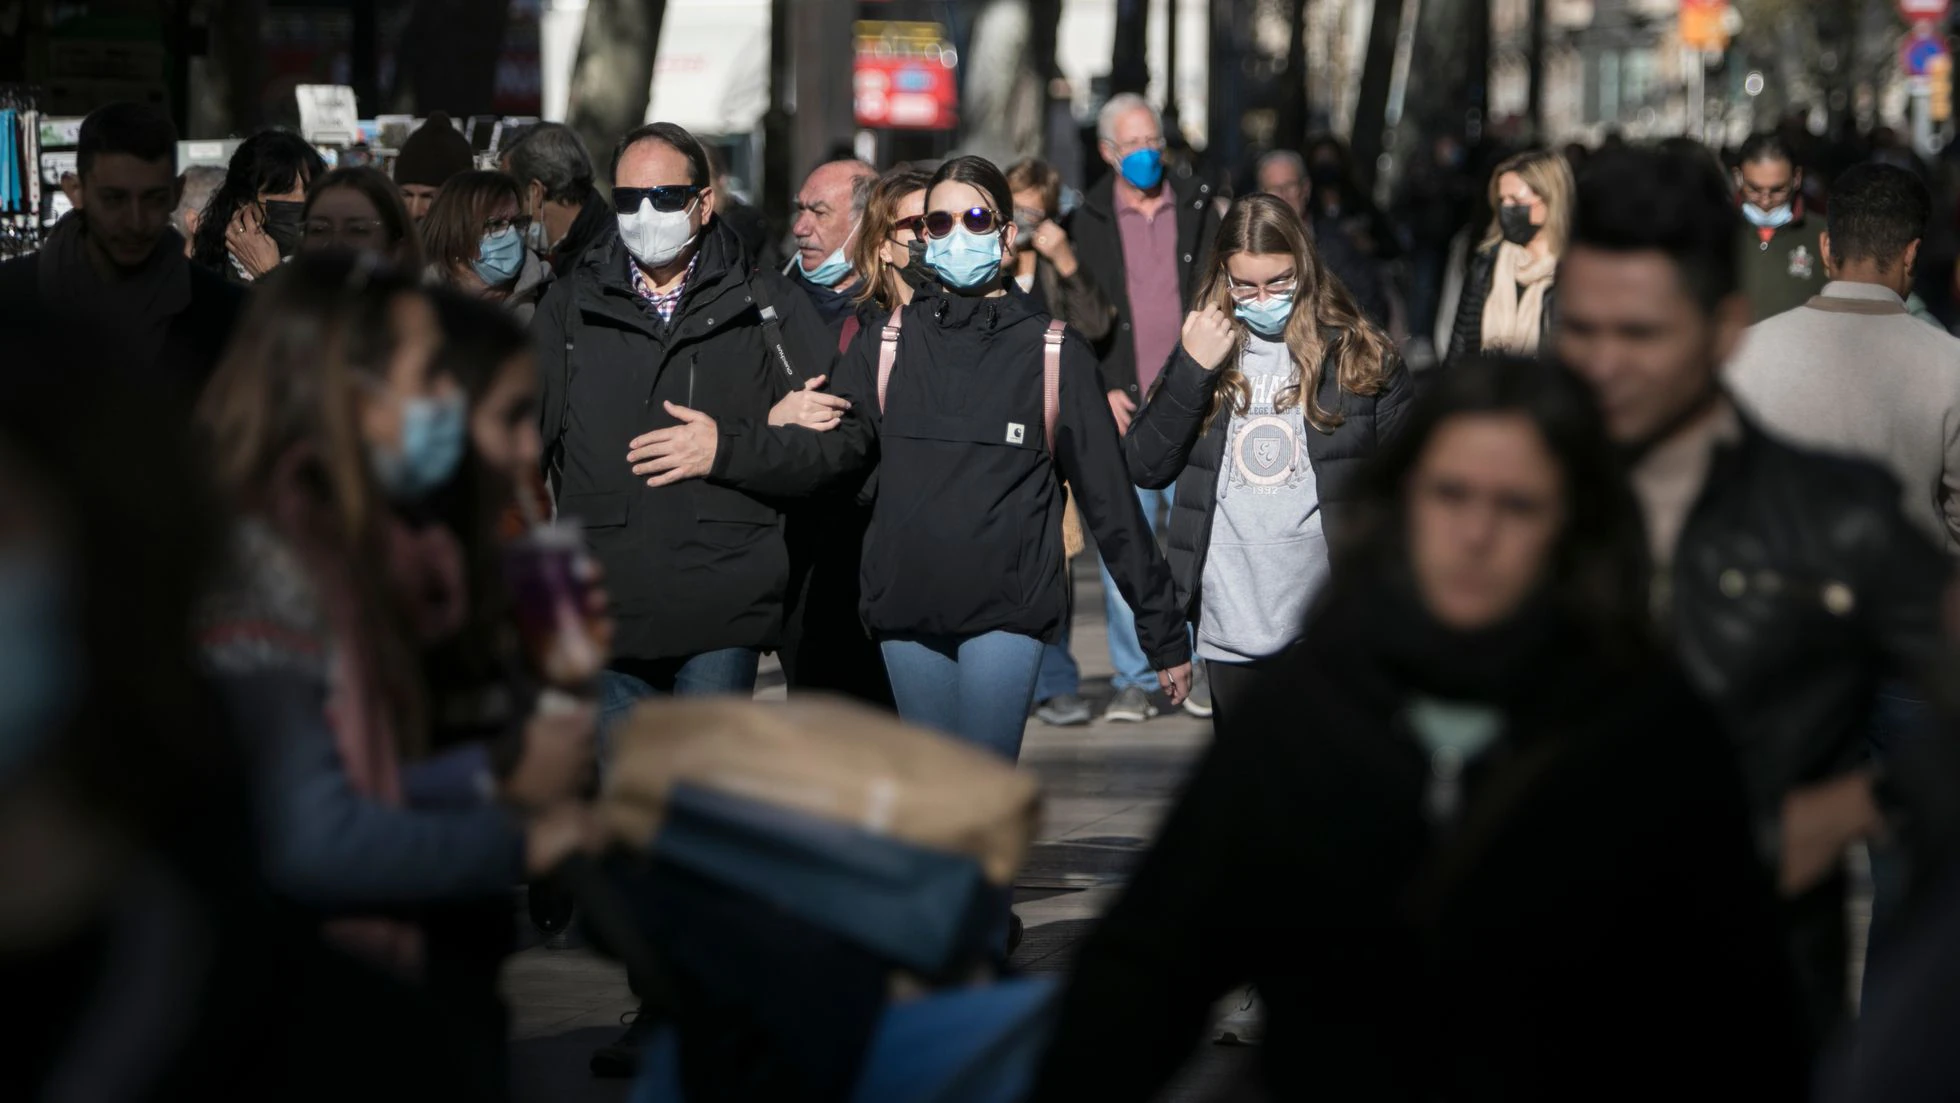 Spain to revoke outdoor facemask mandate